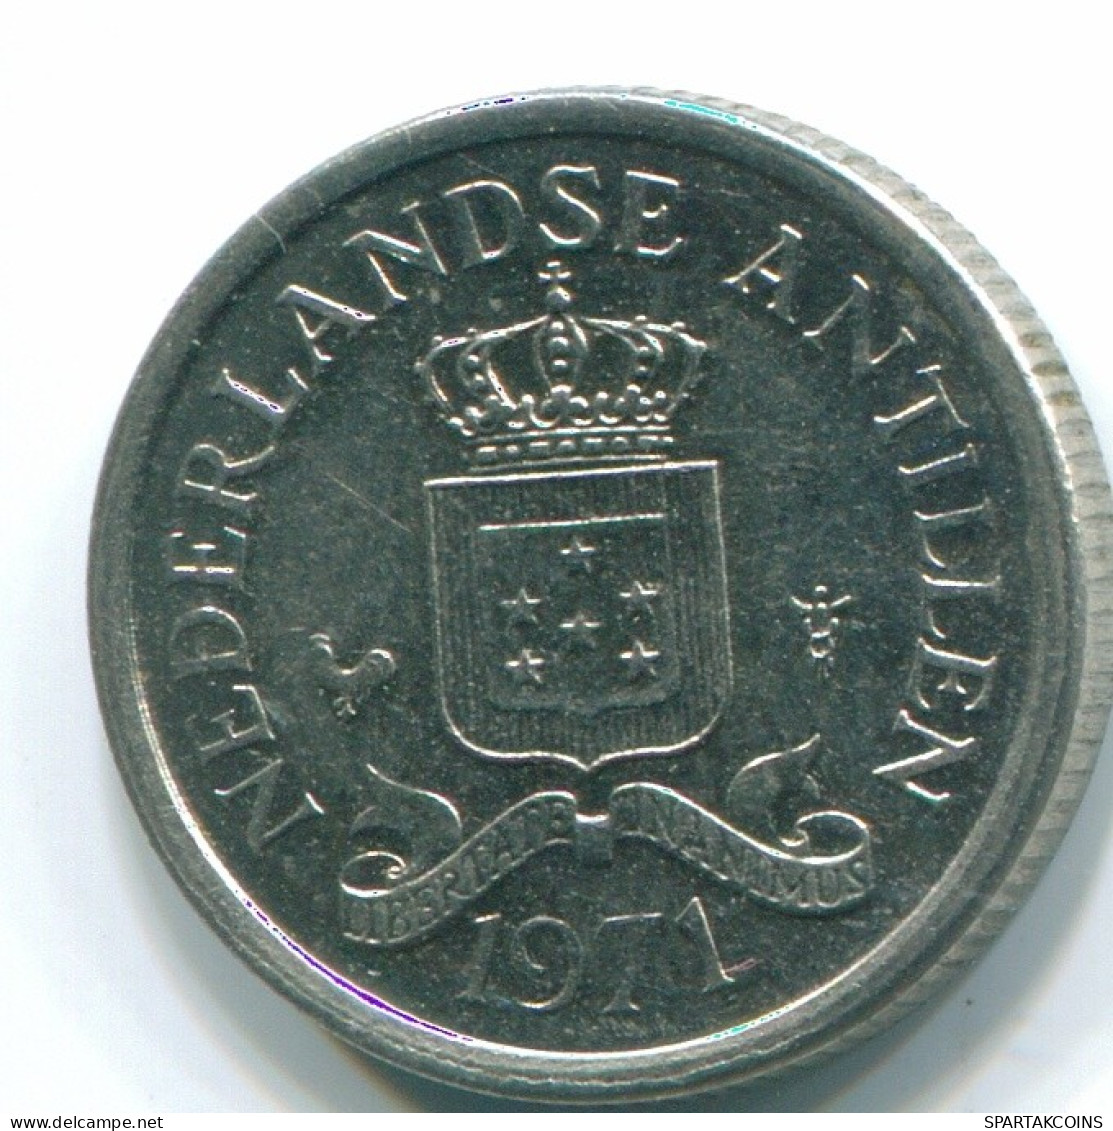 10 CENTS 1971 NETHERLANDS ANTILLES Nickel Colonial Coin #S13468.U.A - Netherlands Antilles